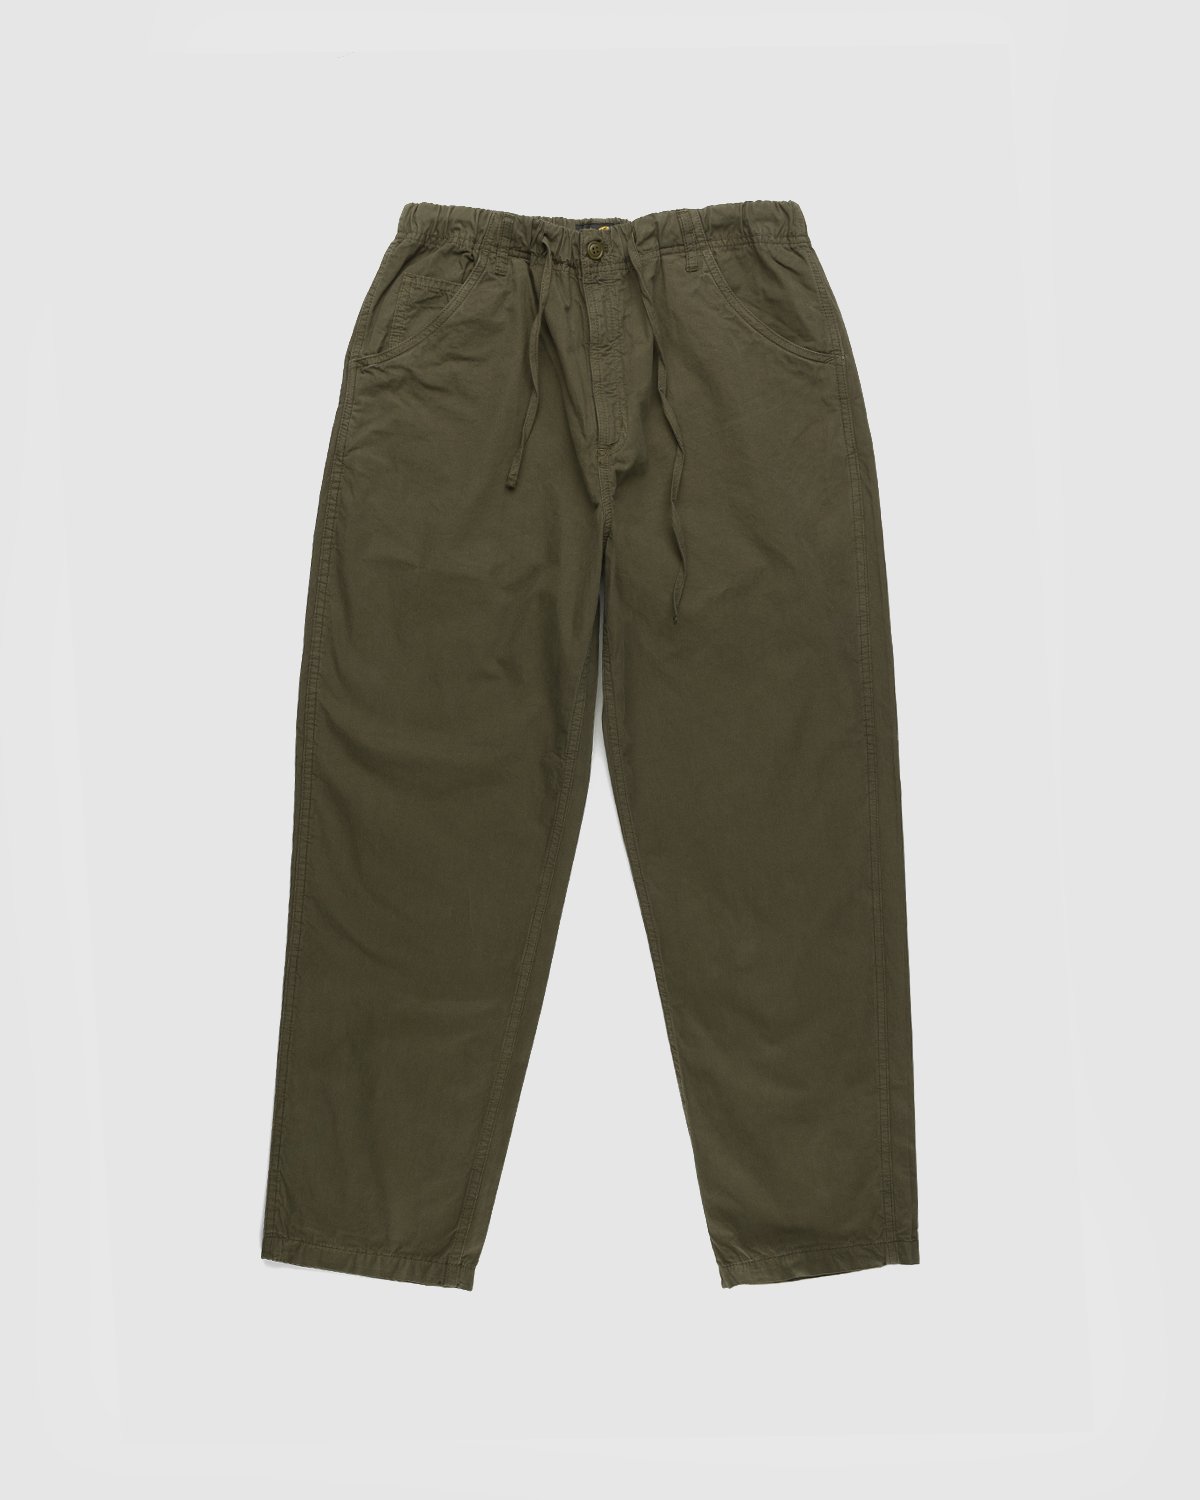 Stan Ray - Rec Pant Olive Poplin - Clothing - Green - Image 1